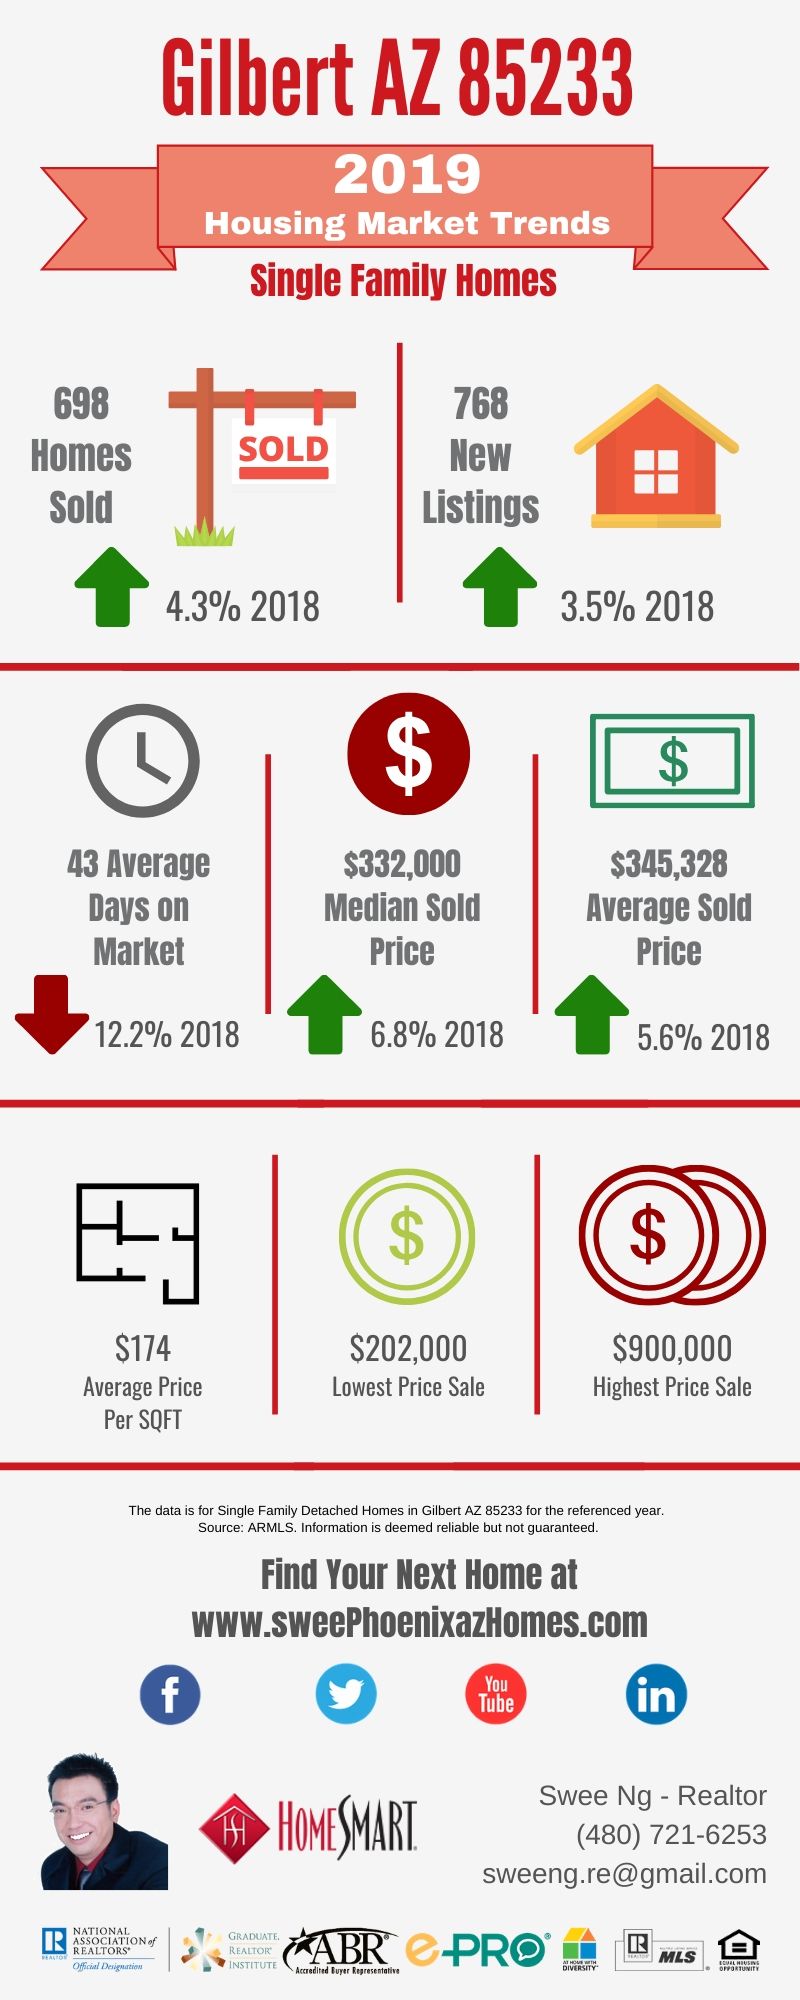 Gilbert AZ 85233 Housing Market Trends Report 2019 by Swee Ng, Real Estate and House Value